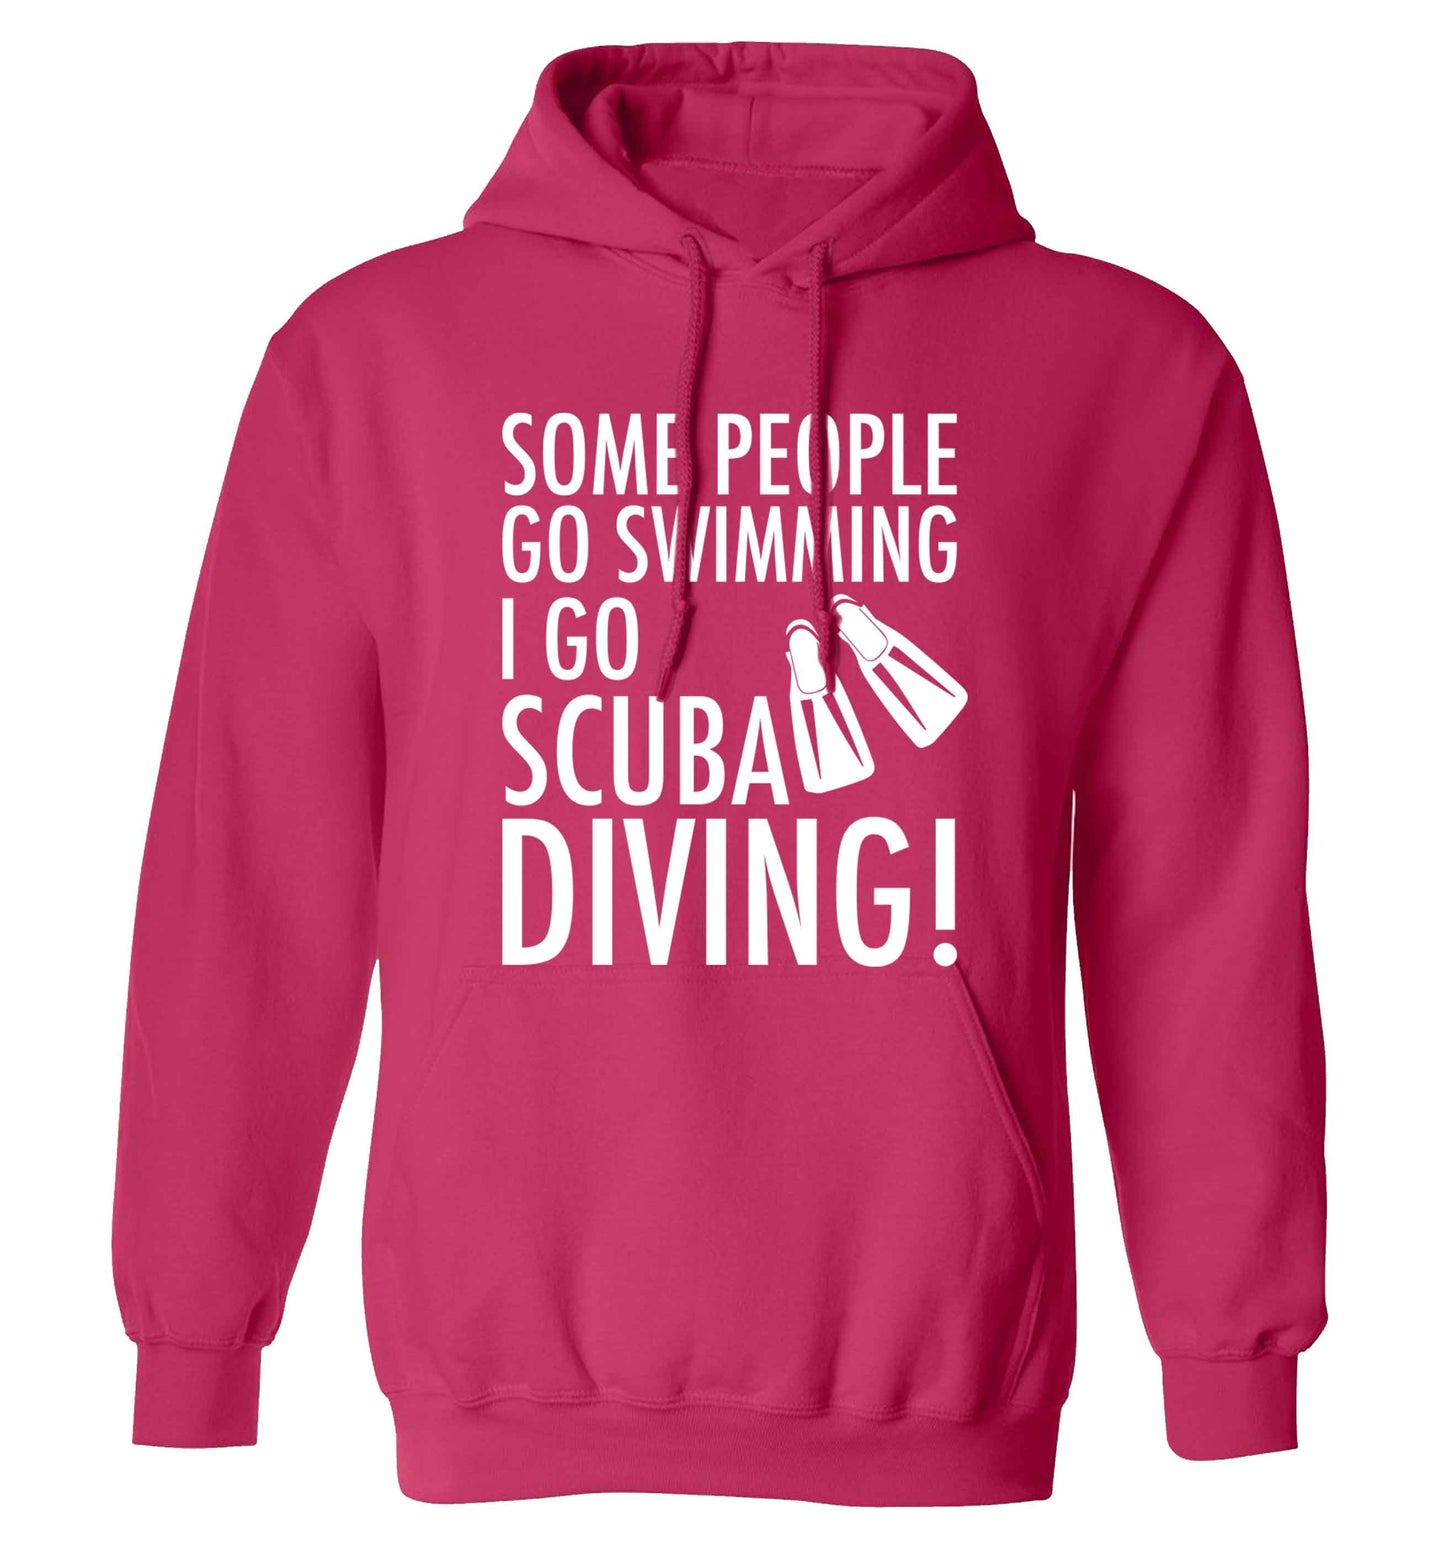 Some people go swimming I go scuba diving! adults unisex pink hoodie 2XL